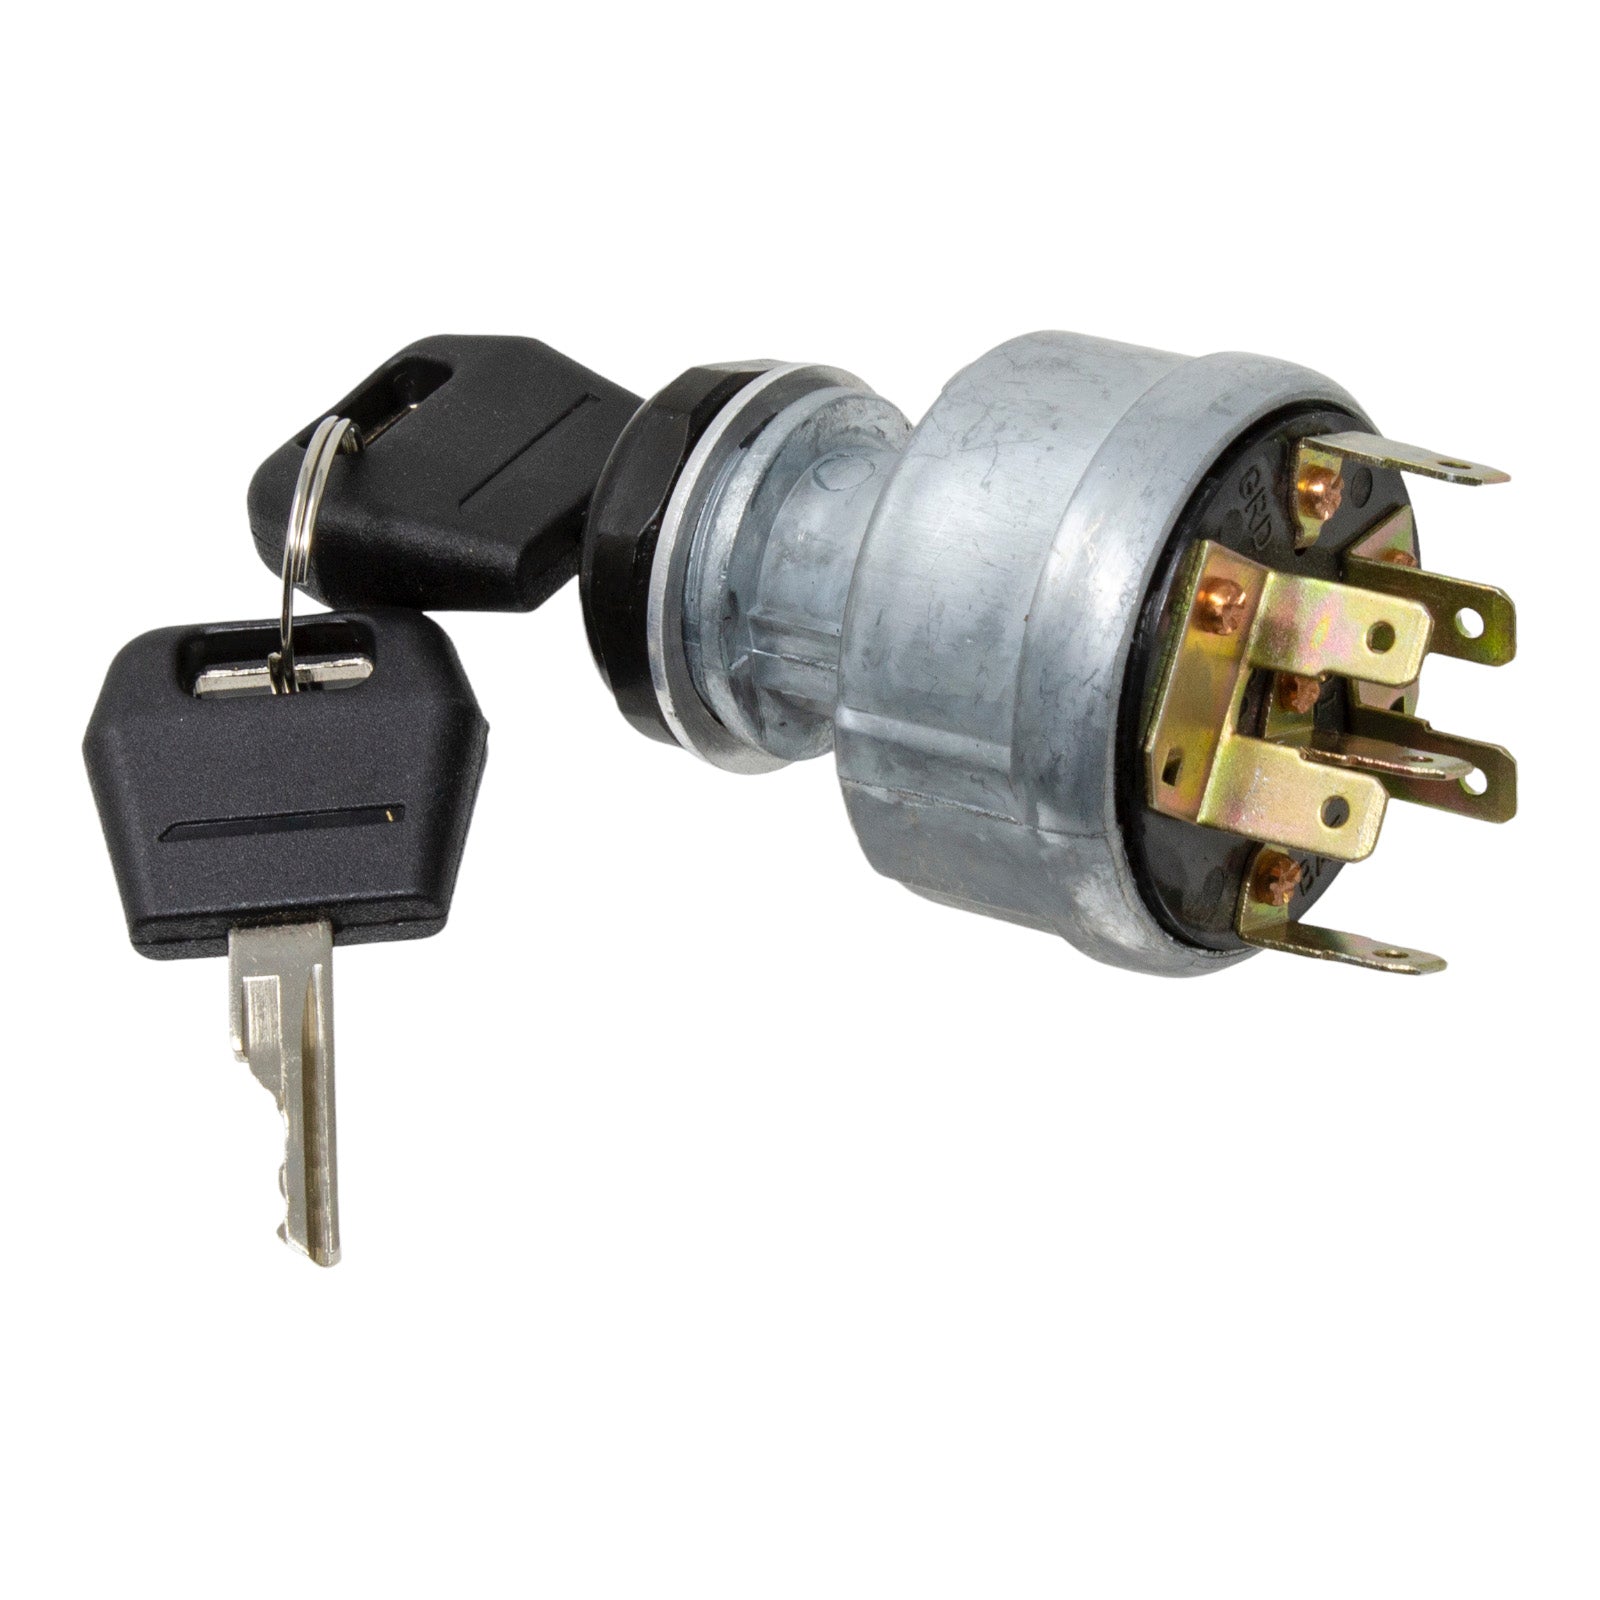 Duraforce R6961, Ignition Switch For Case IH